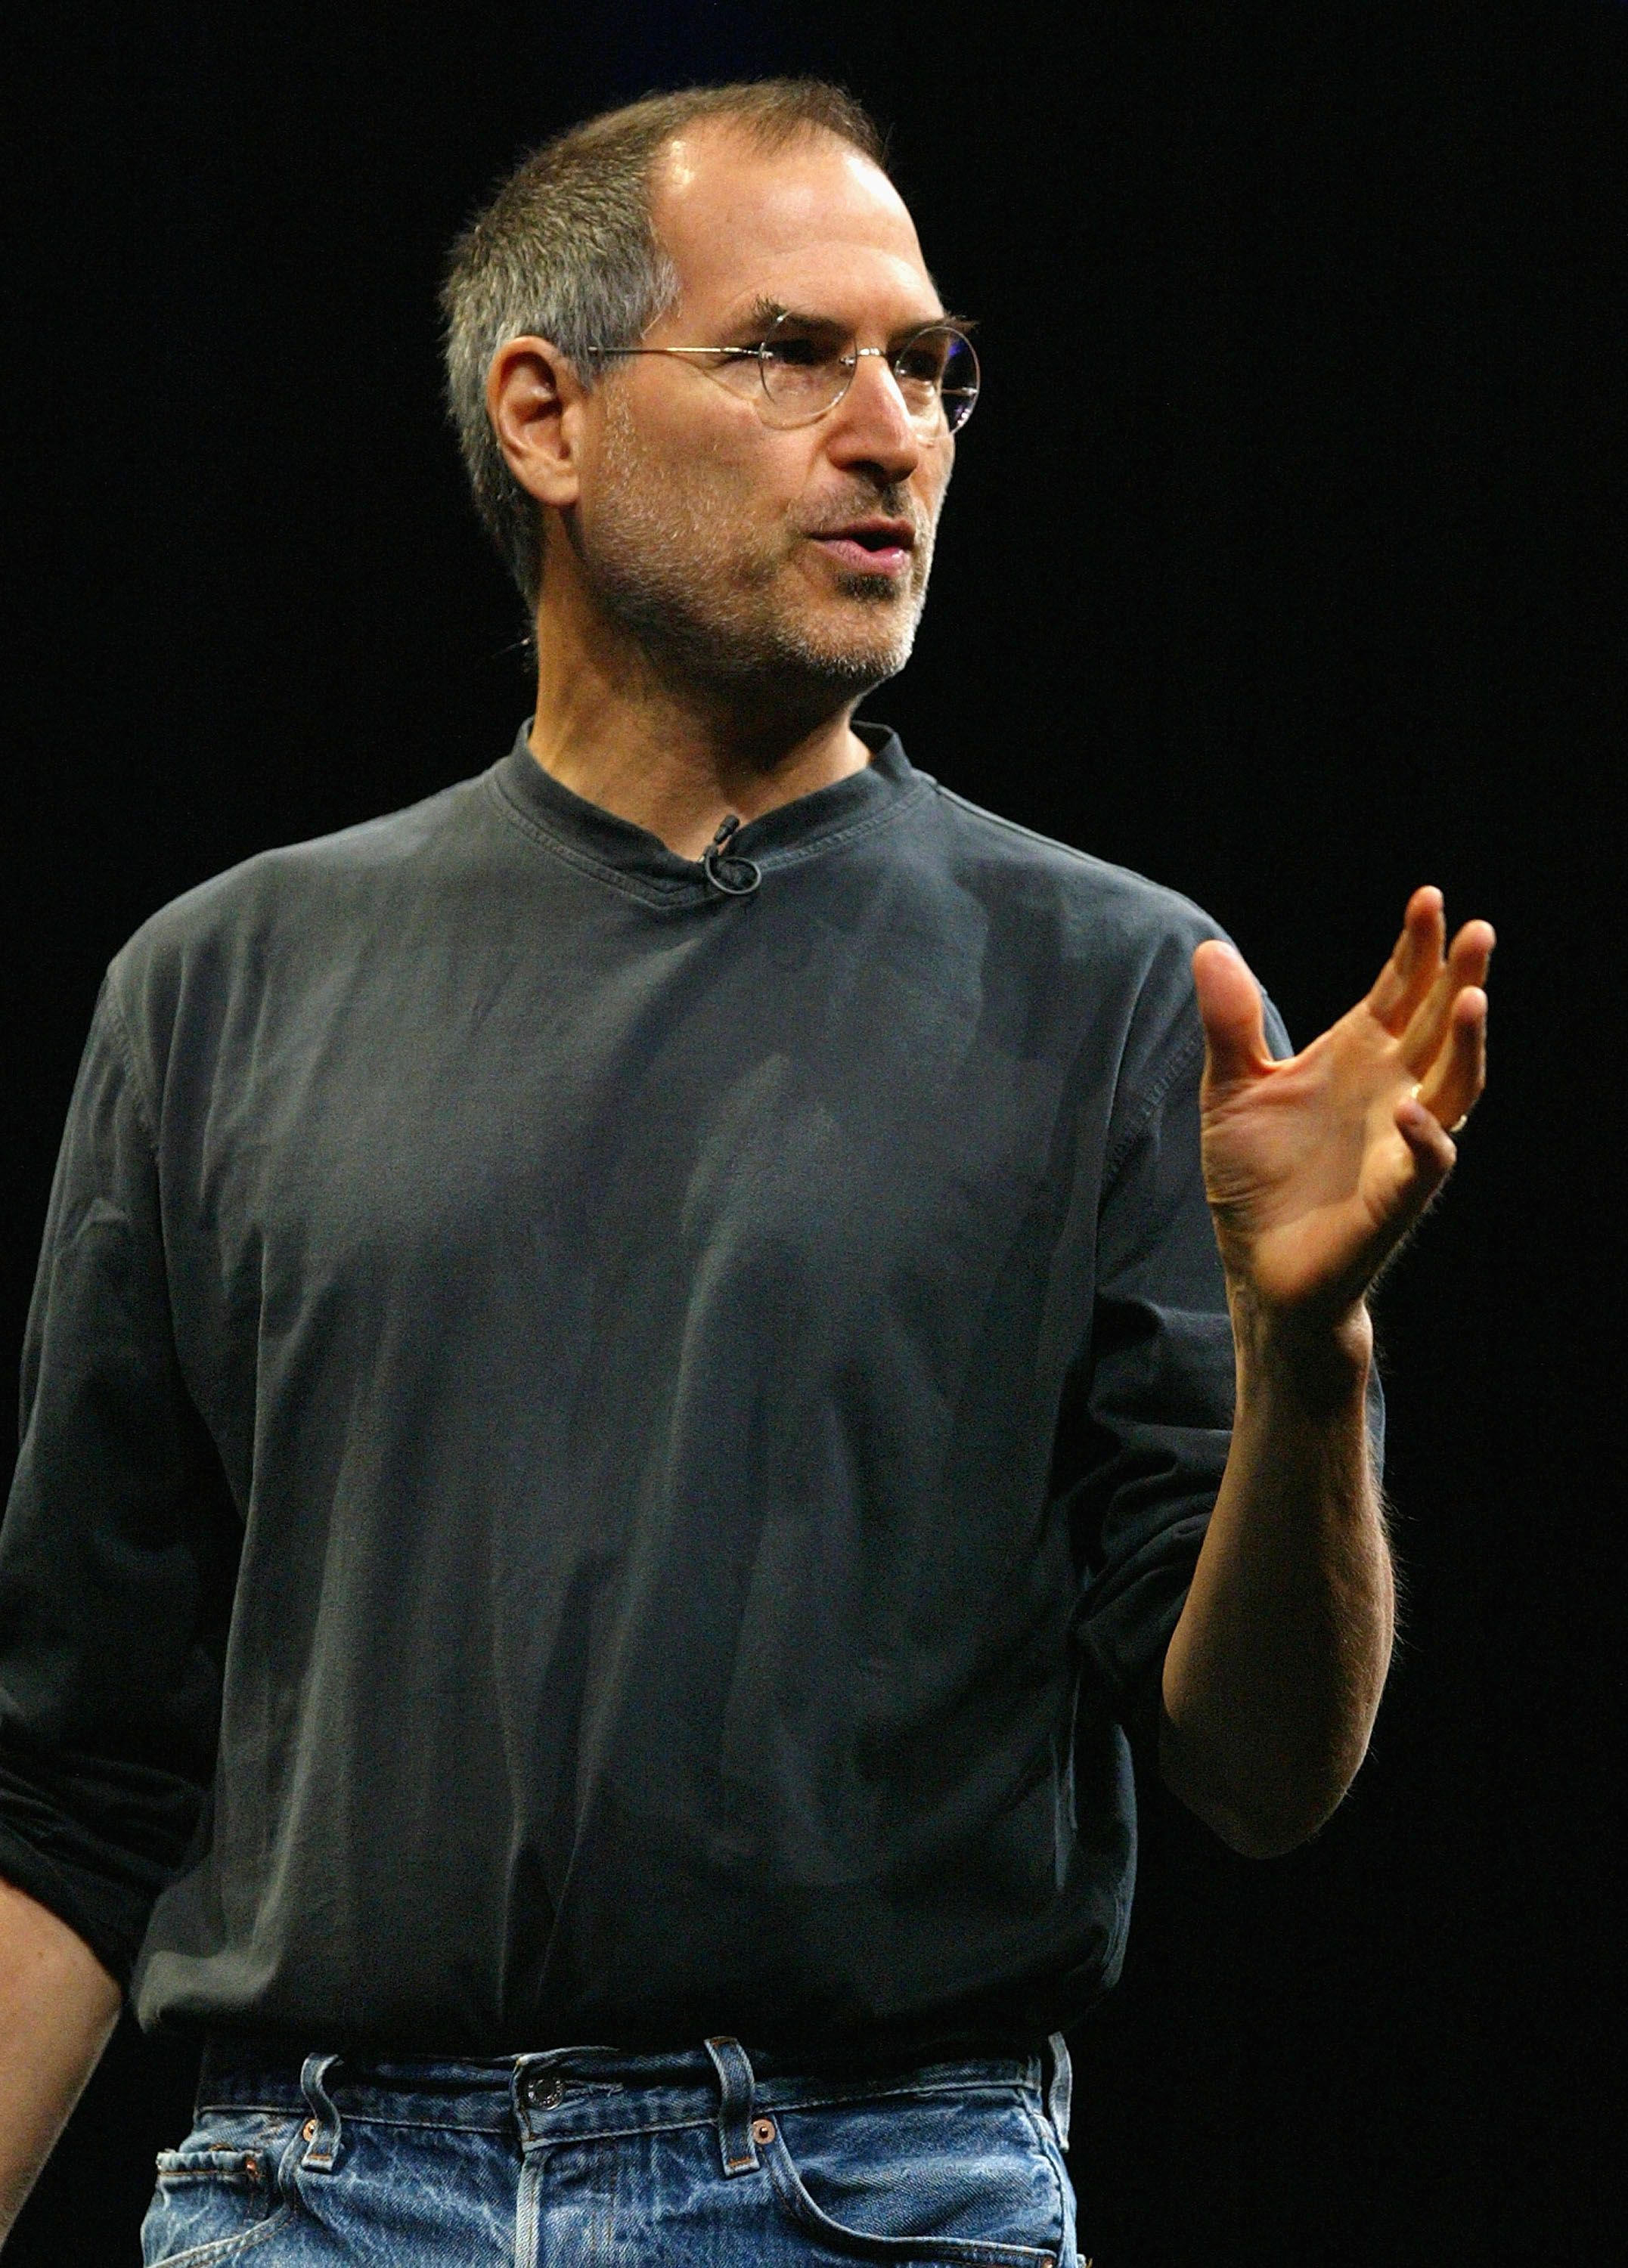 Steve Jobs at the 2004 Worldwide Developers Conference on June 28, 2004, in San Francisco, California | Photo: Justin Sullivan/Getty Images